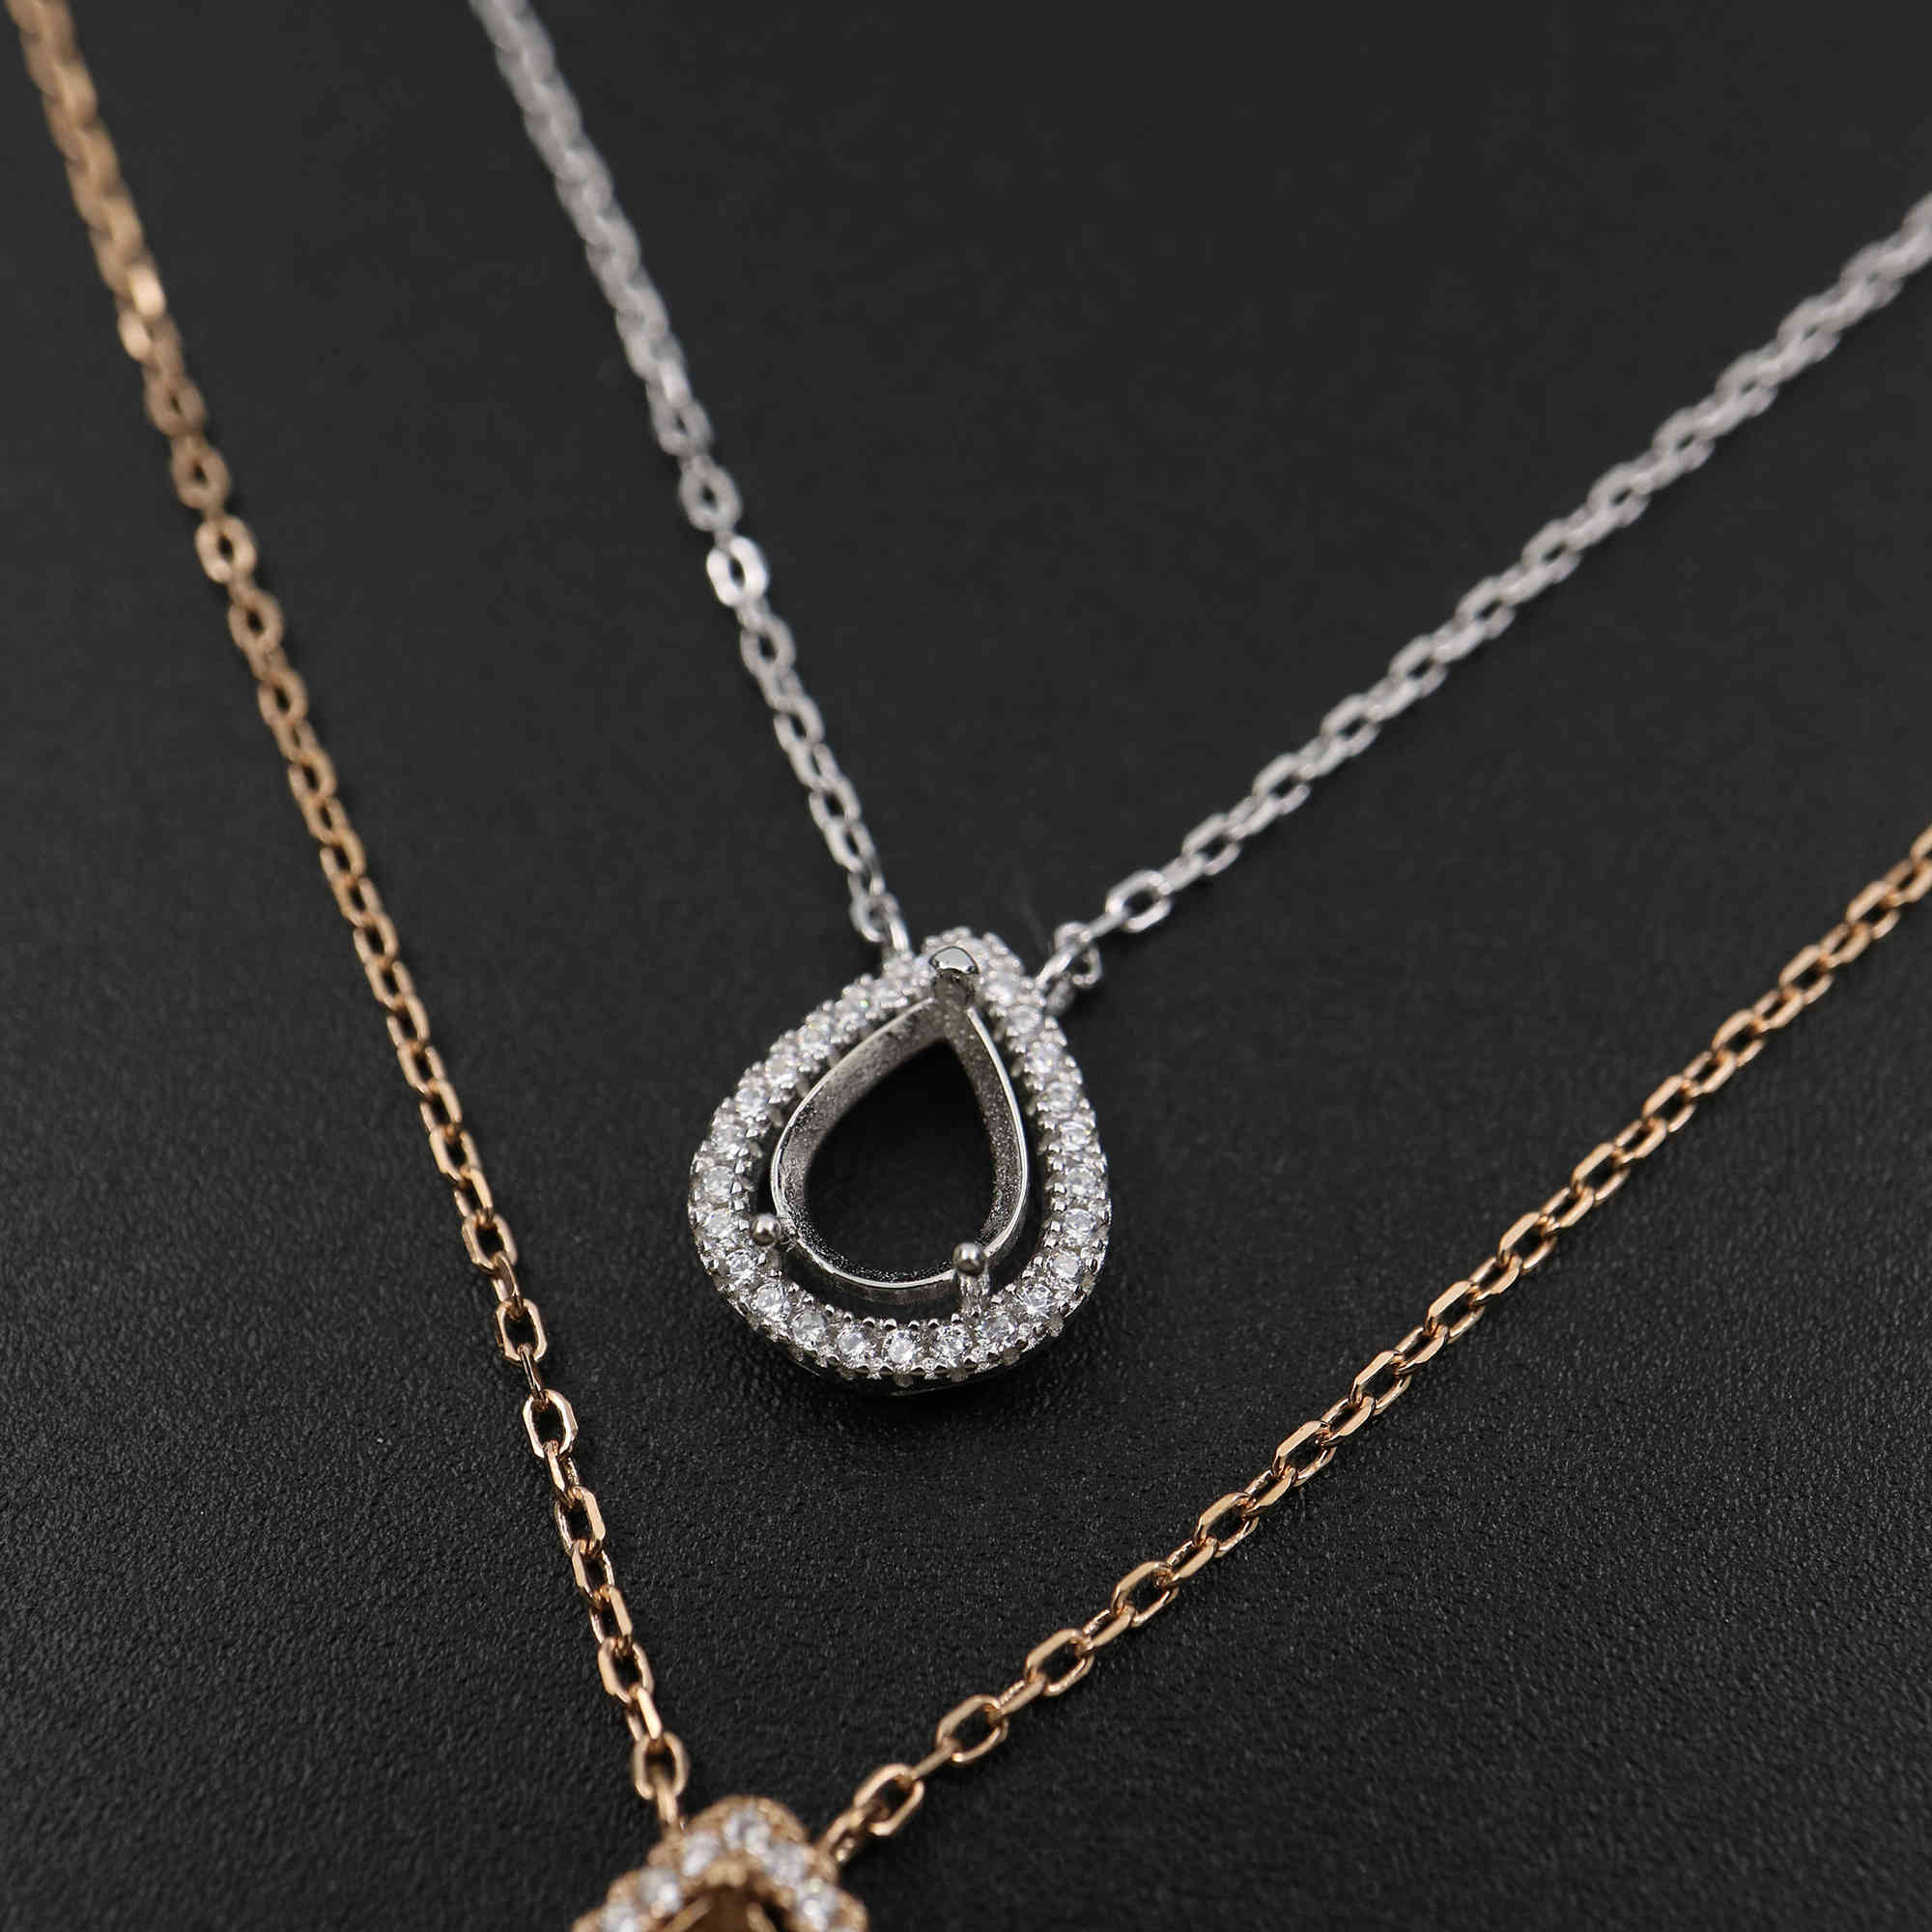 1Pcs 6X8MM Pear Bezel Halo Pave Pendant Settings Rose Gold Plated Solid 925 Sterling Silver Necklace 16Inches +2 Inches Extension DIY Gemstone Supplies 1431046 - Click Image to Close